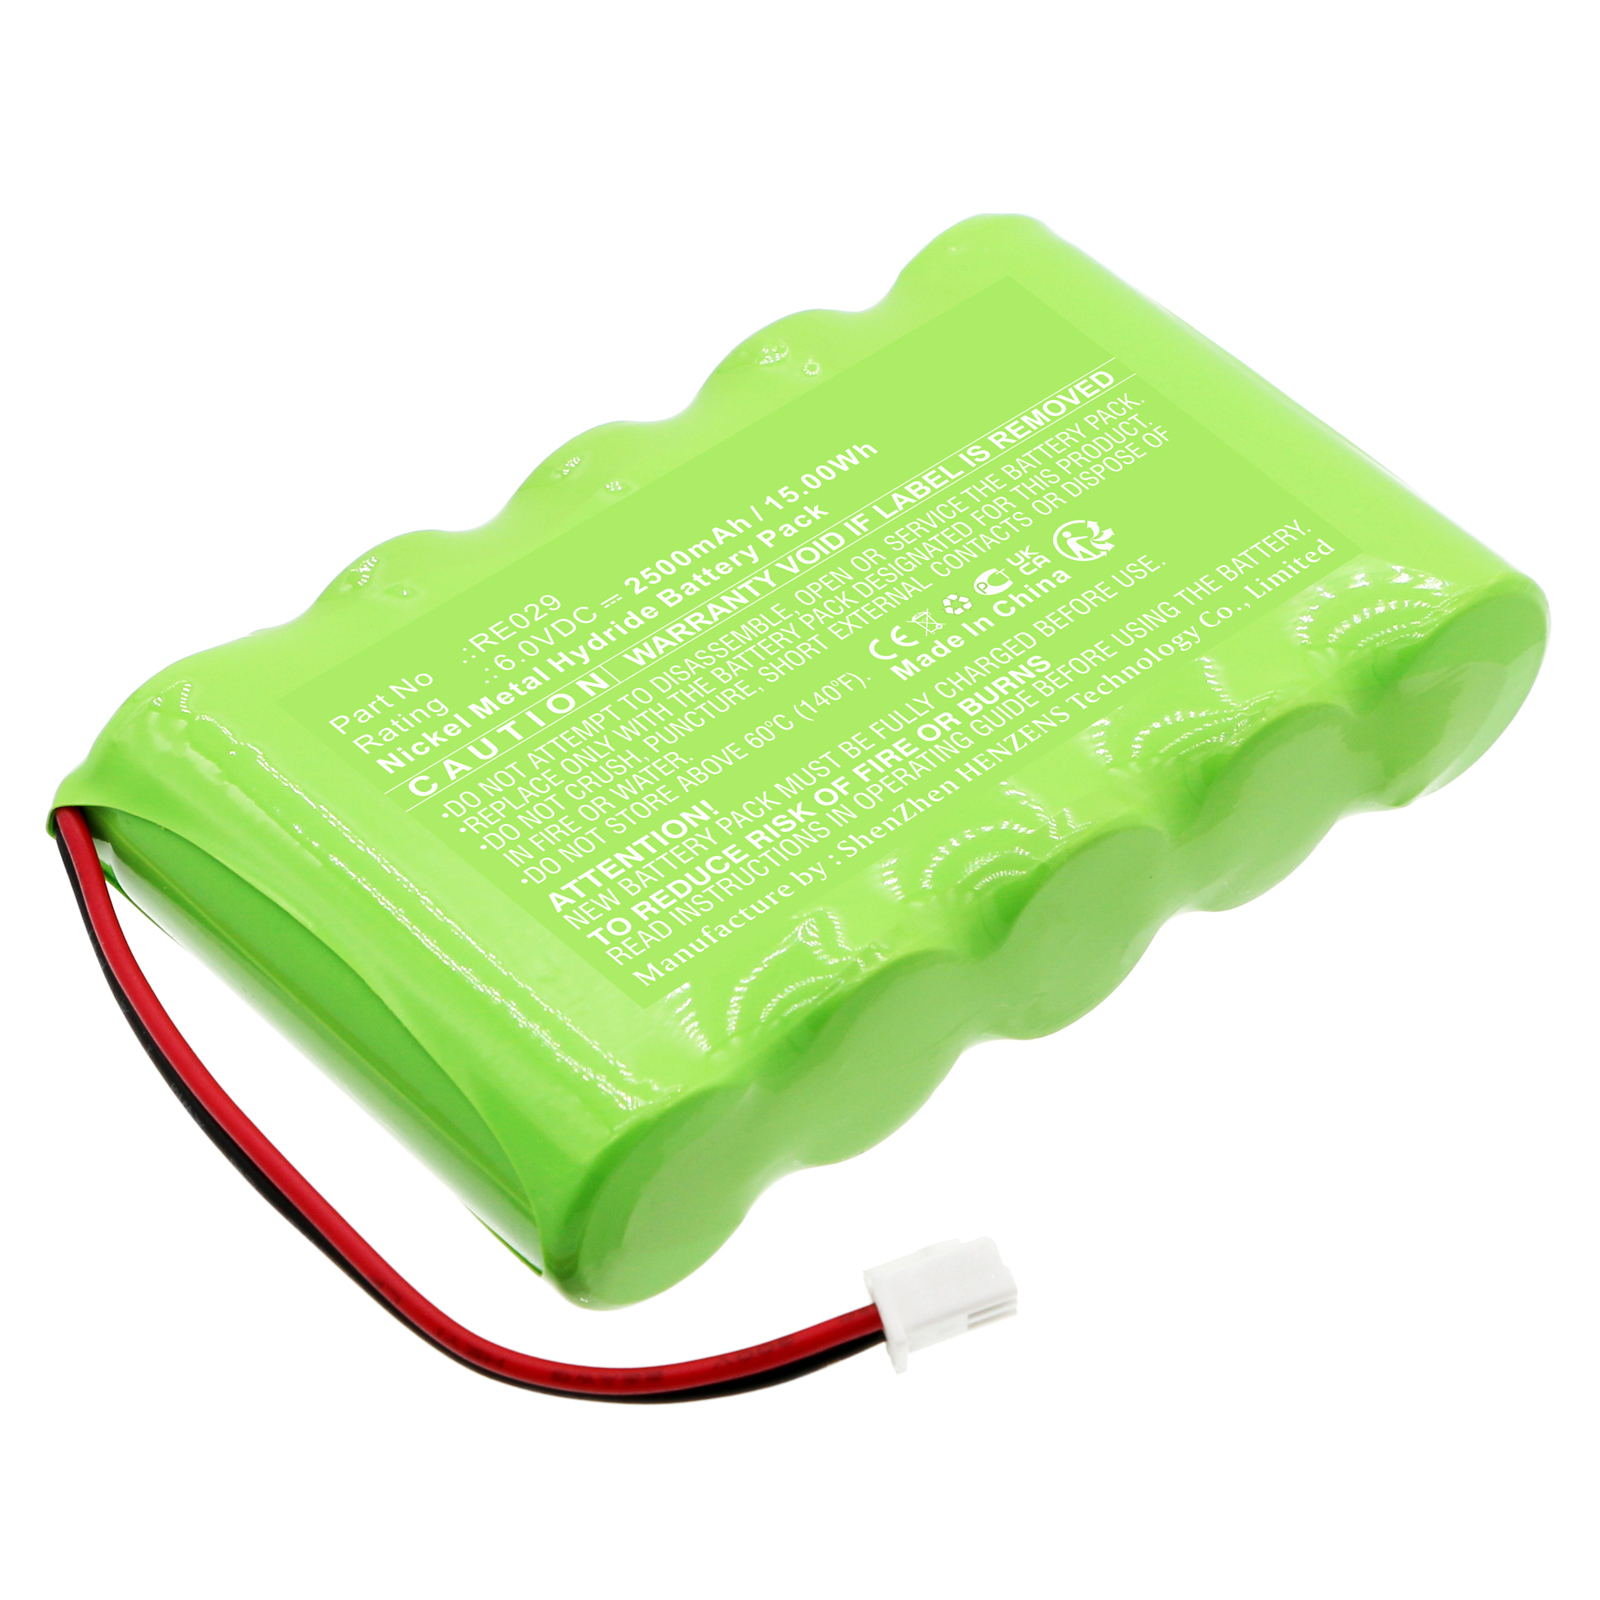 Batteries for AlulaAlarm System